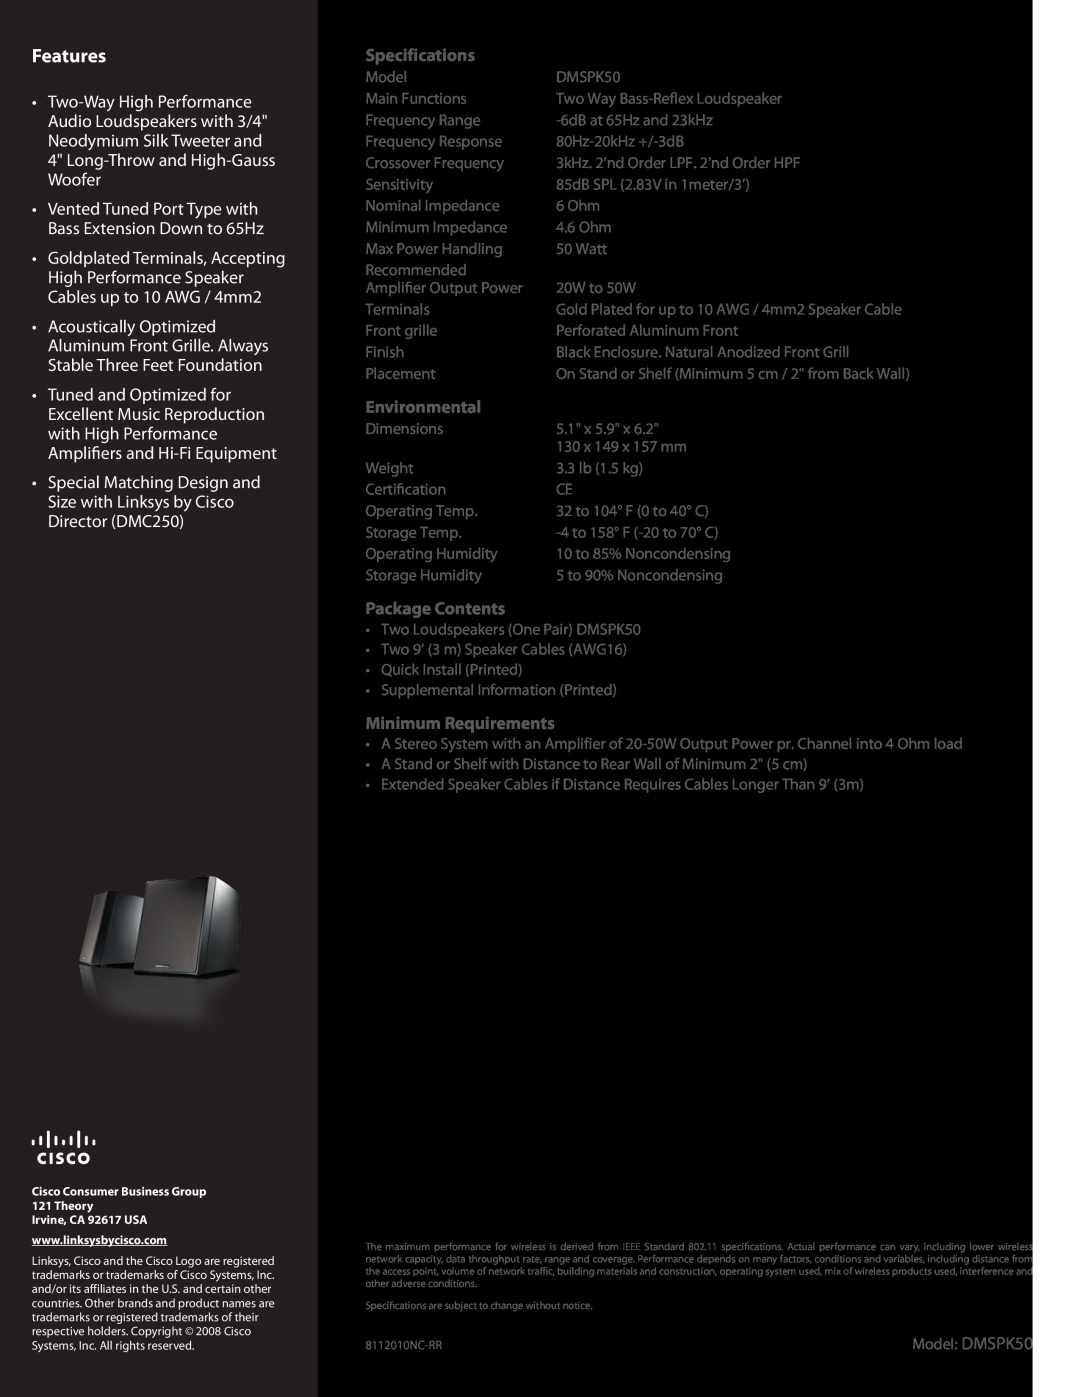 Linksys DMSPK50 manual Features, Specifications, Environmental, Package Contents, Minimum Requirements 